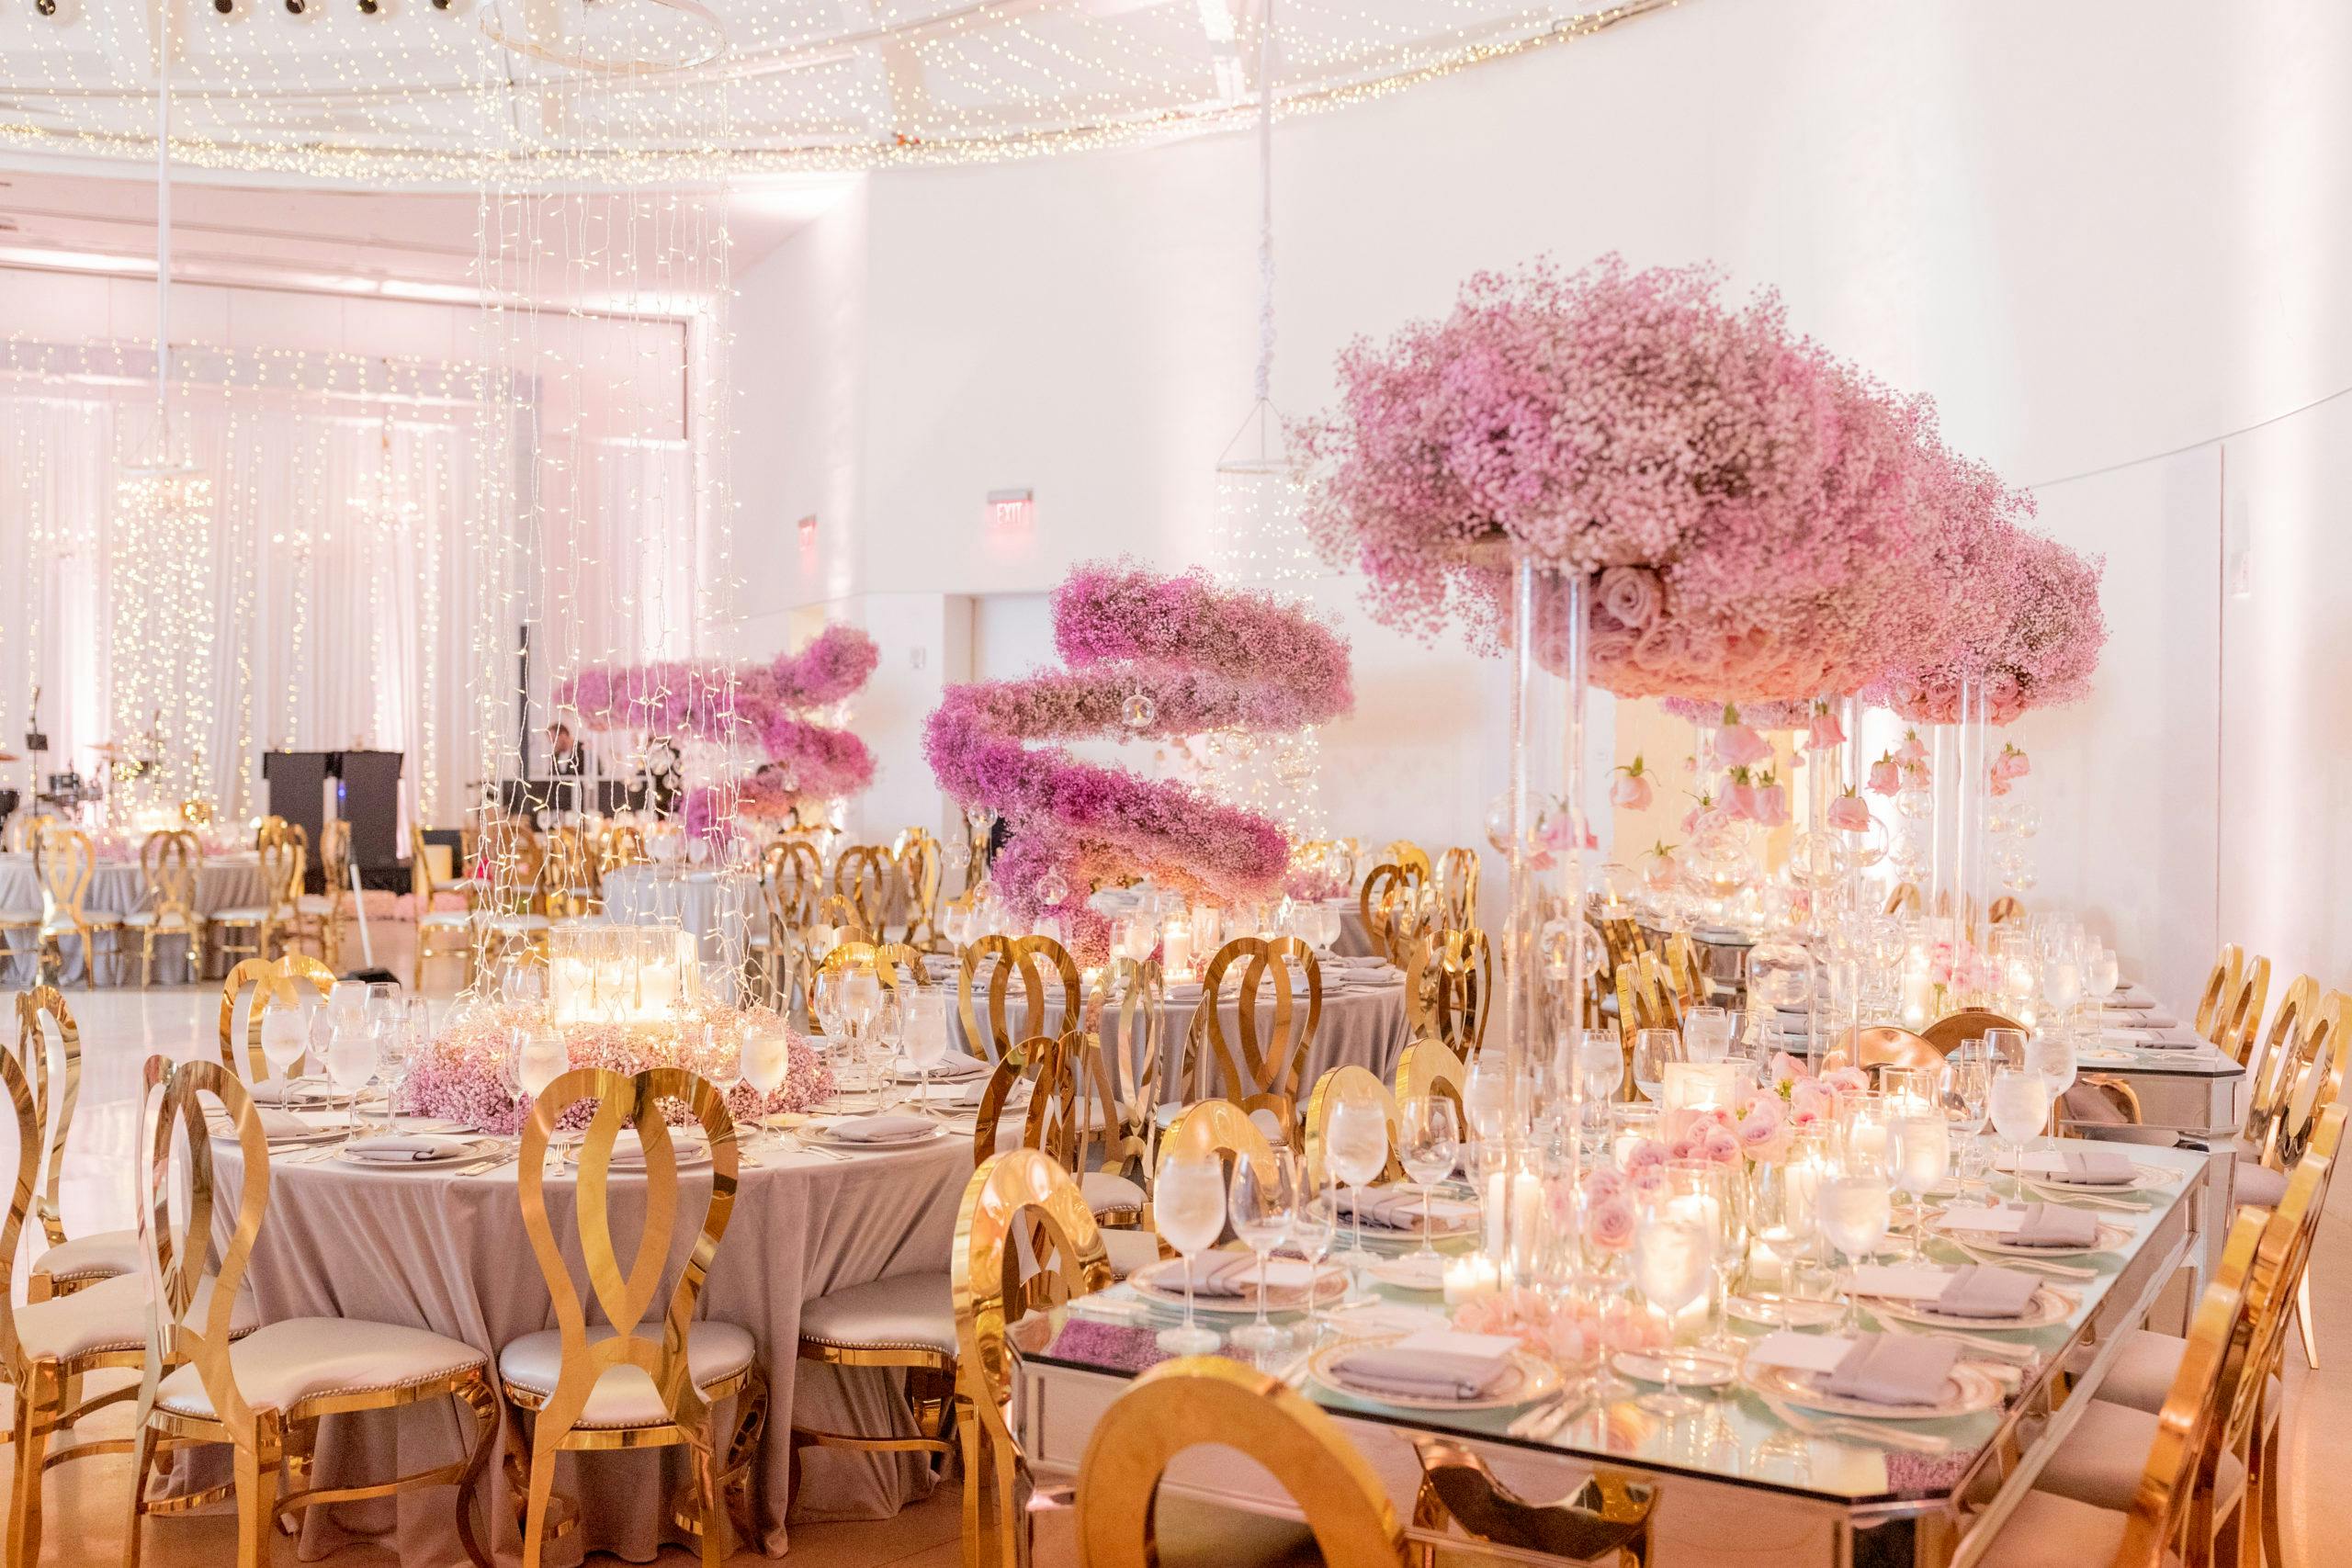 Modern Wedding Reception with Gold Tablescapes and Pink Corkscrew Baby’s Breath Centerpieces | PartySlate